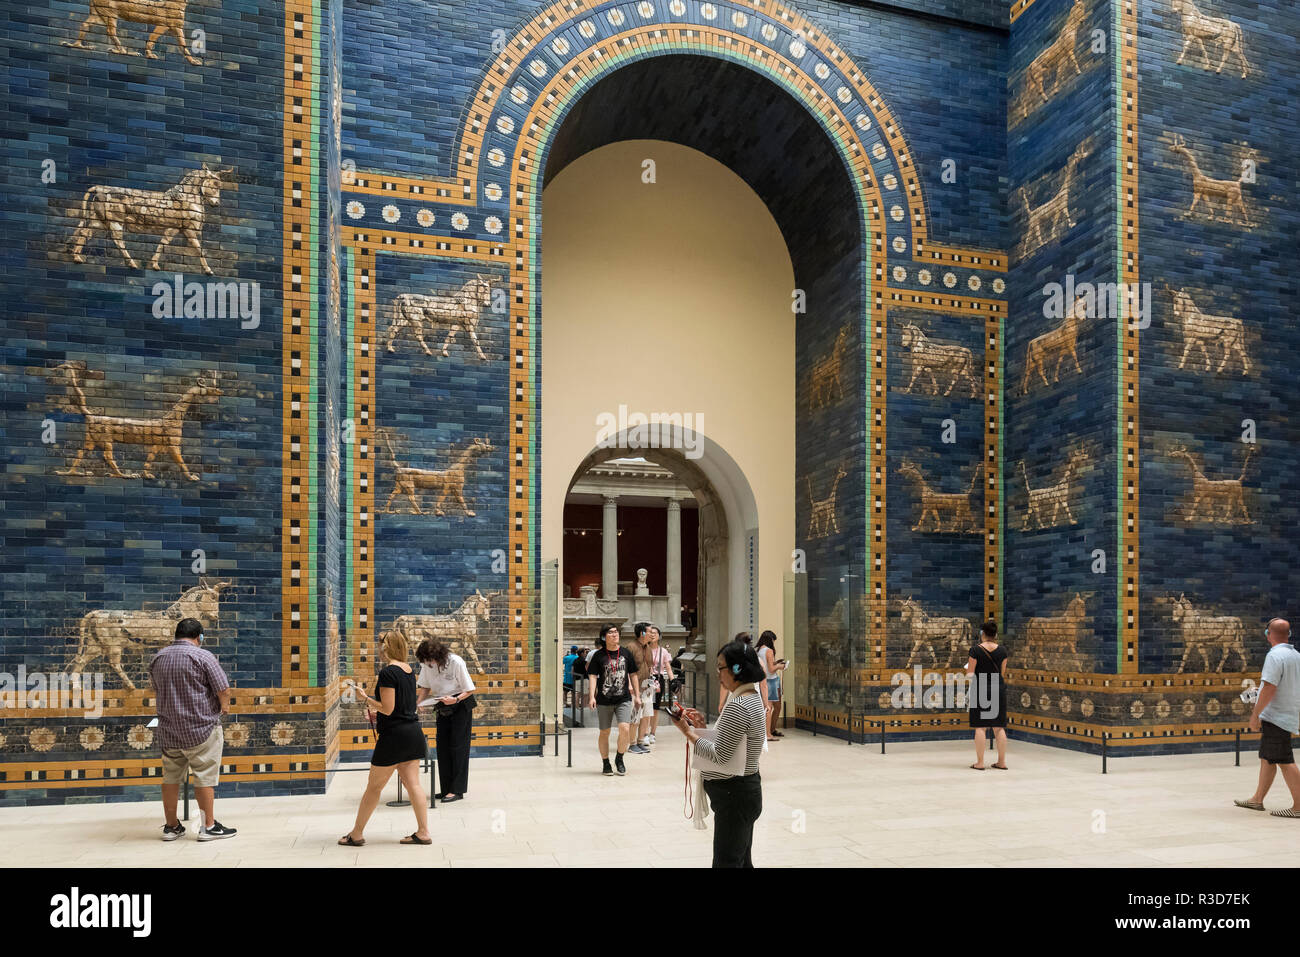 Berlin. Germany. Pergamon Museum. Reconstruction of the Ishtar Gate of Babylon.  The Ishtar Gate was the eighth gate to the inner city of Babylon. It  Stock Photo